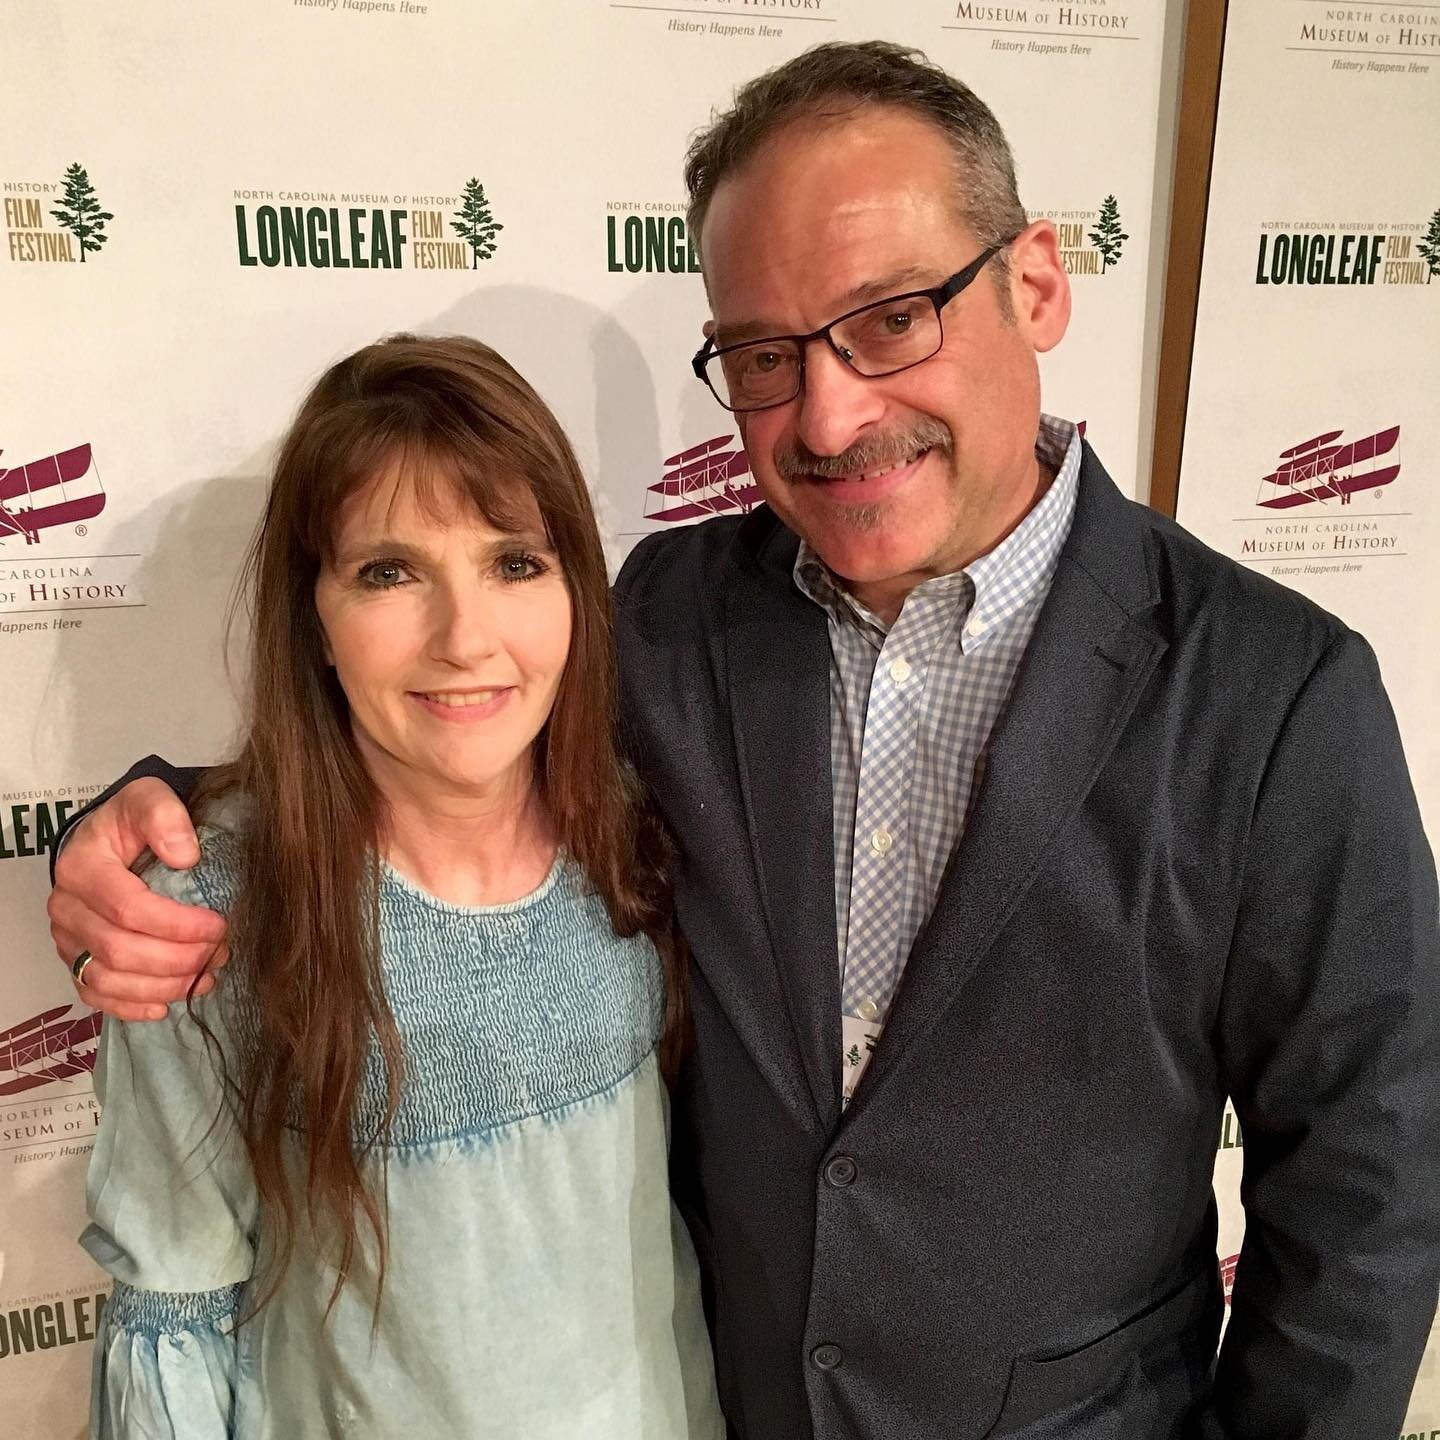 Our producer, Steve Neilson, will be returning as host of the awards ceremony for the Longleaf Film Festival in downtown Raleigh. (That's Steve with festival director Sally Bloom.)

The ceremony will take place at 7:30 PM on Saturday, May 13, in Dani